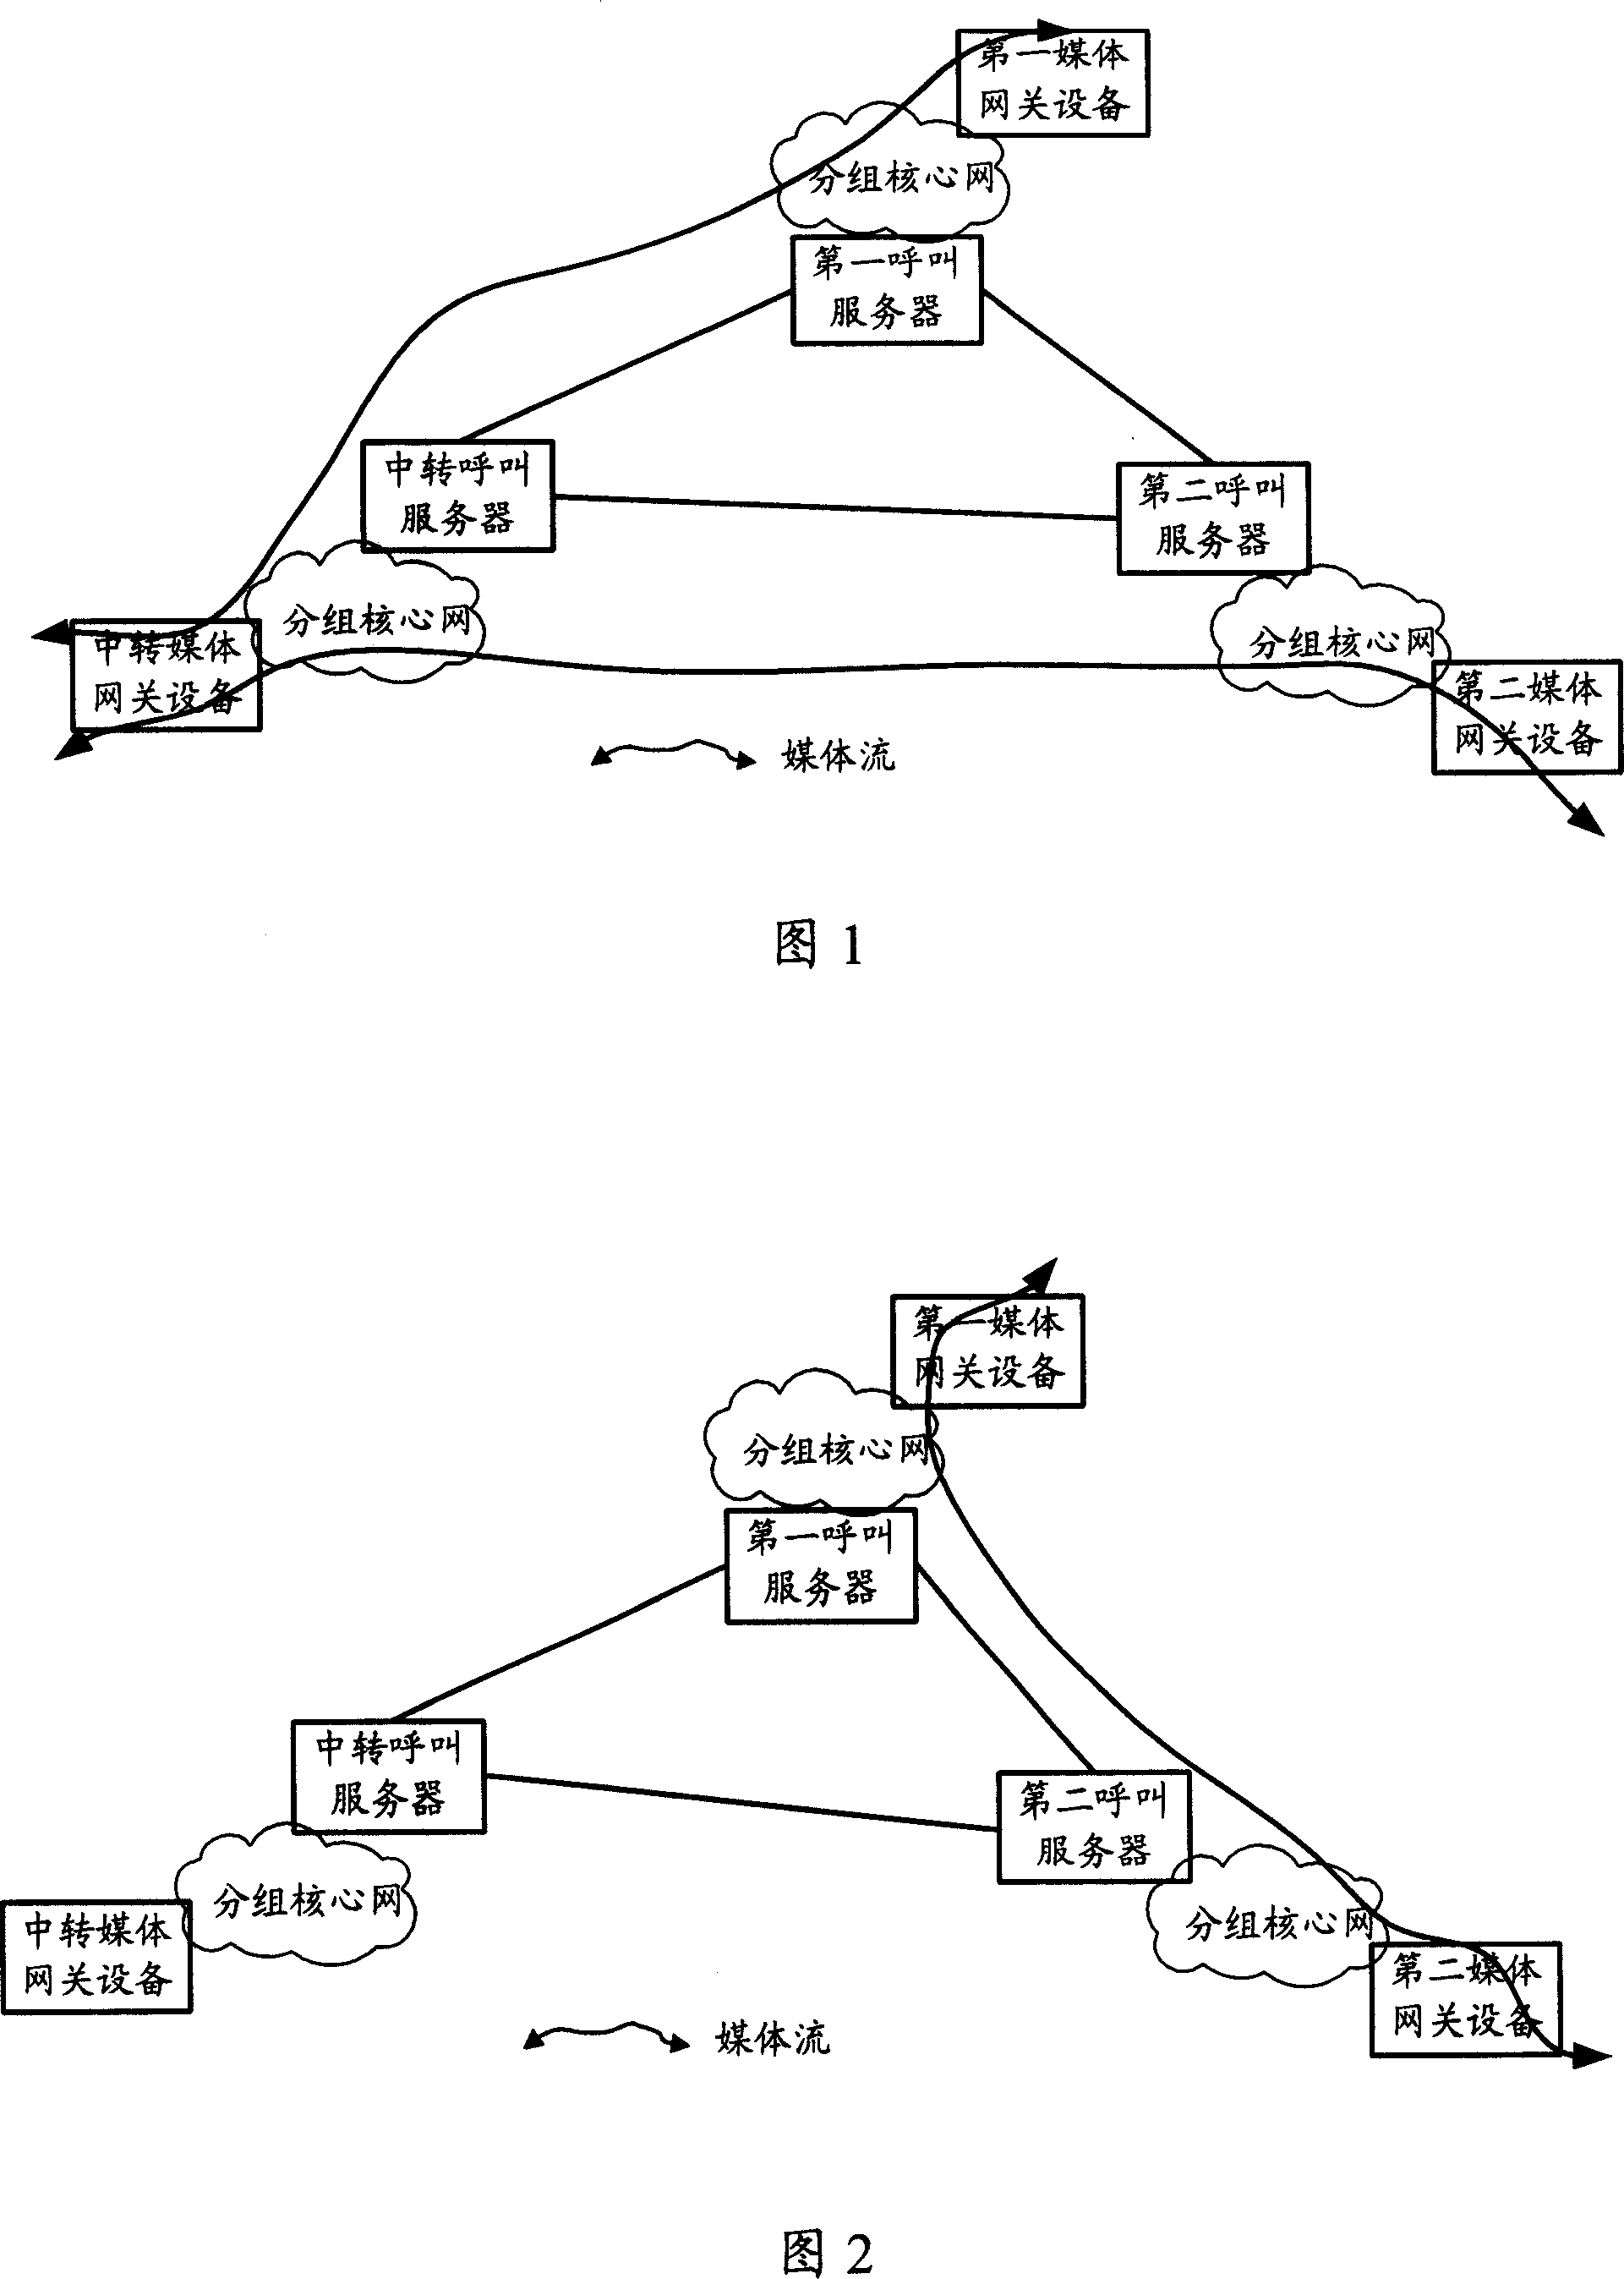 A method, system and device for media stream transmission